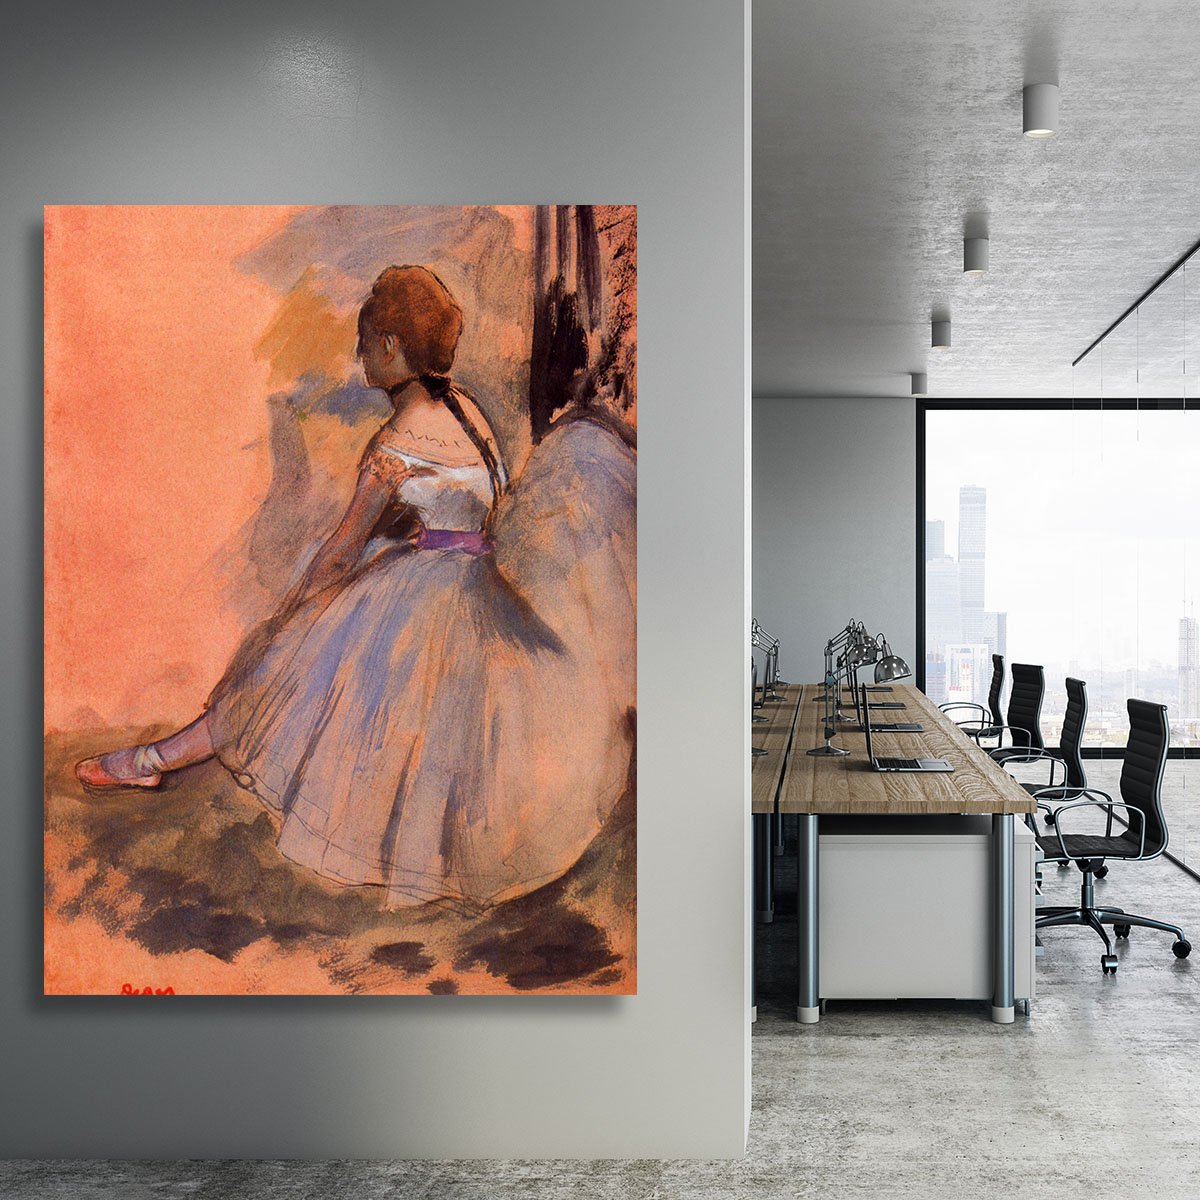 Sitting dancer with extended left leg by Degas Canvas Print or Poster